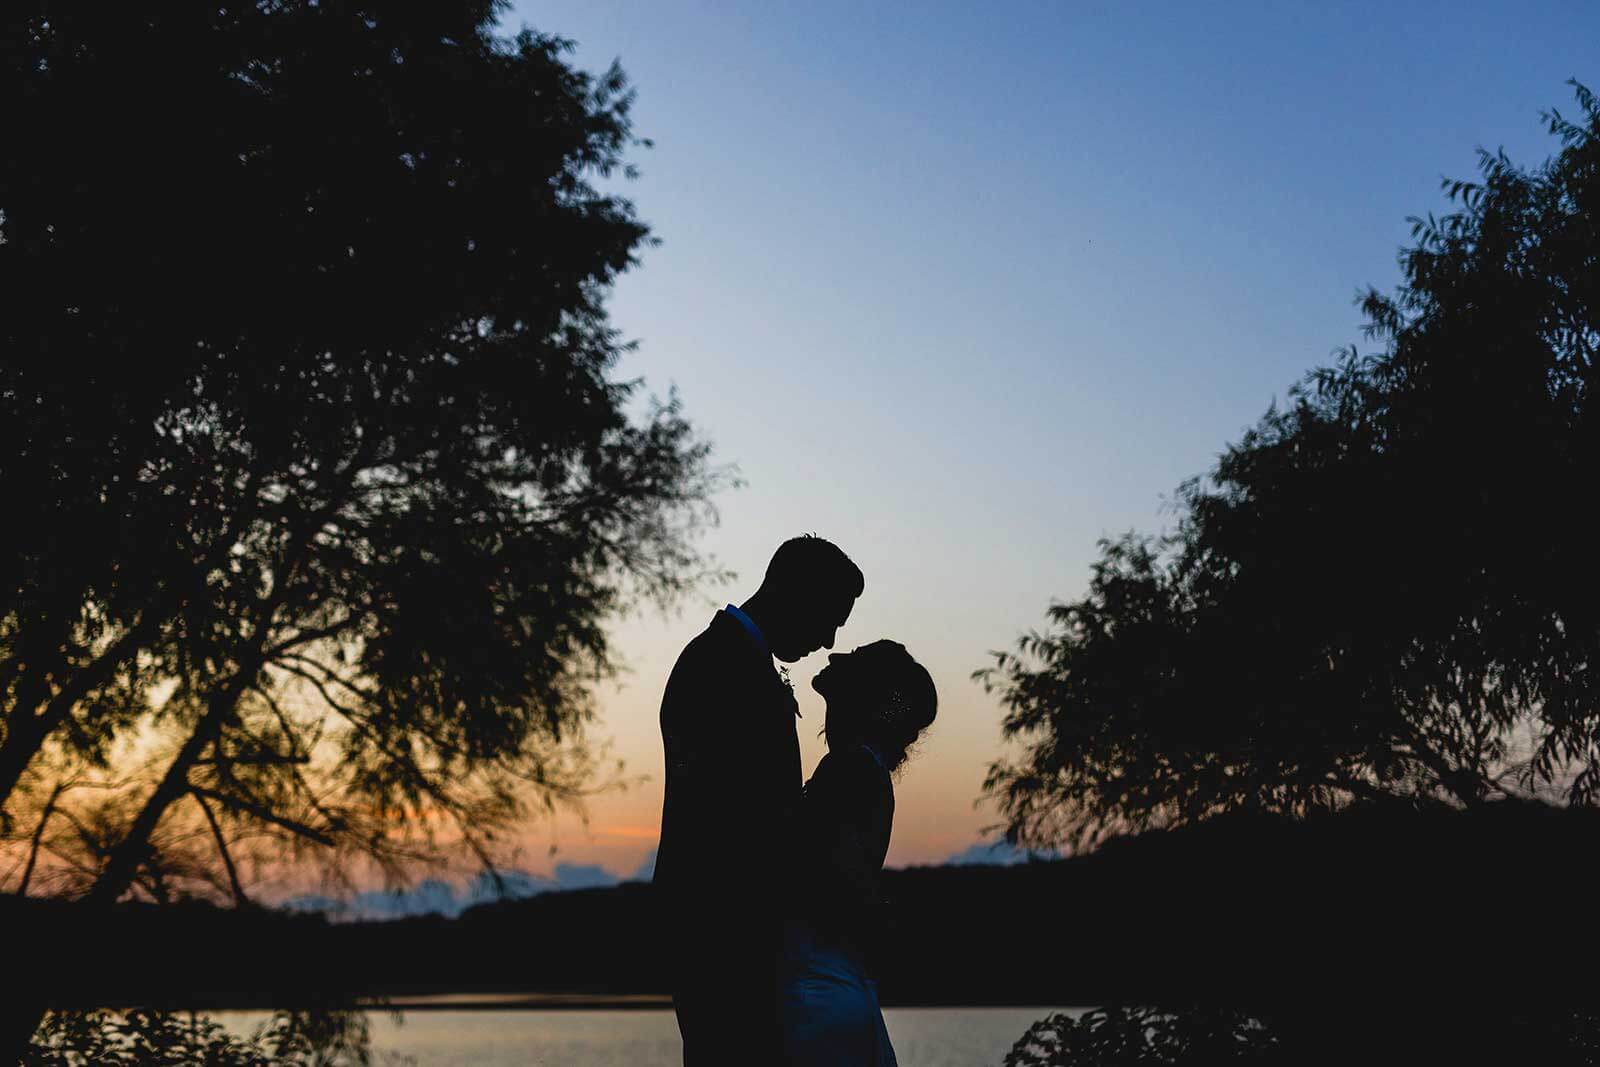 A bride and groom are silhouetted by a lake at sunset, capturing a memorable wedding experience.